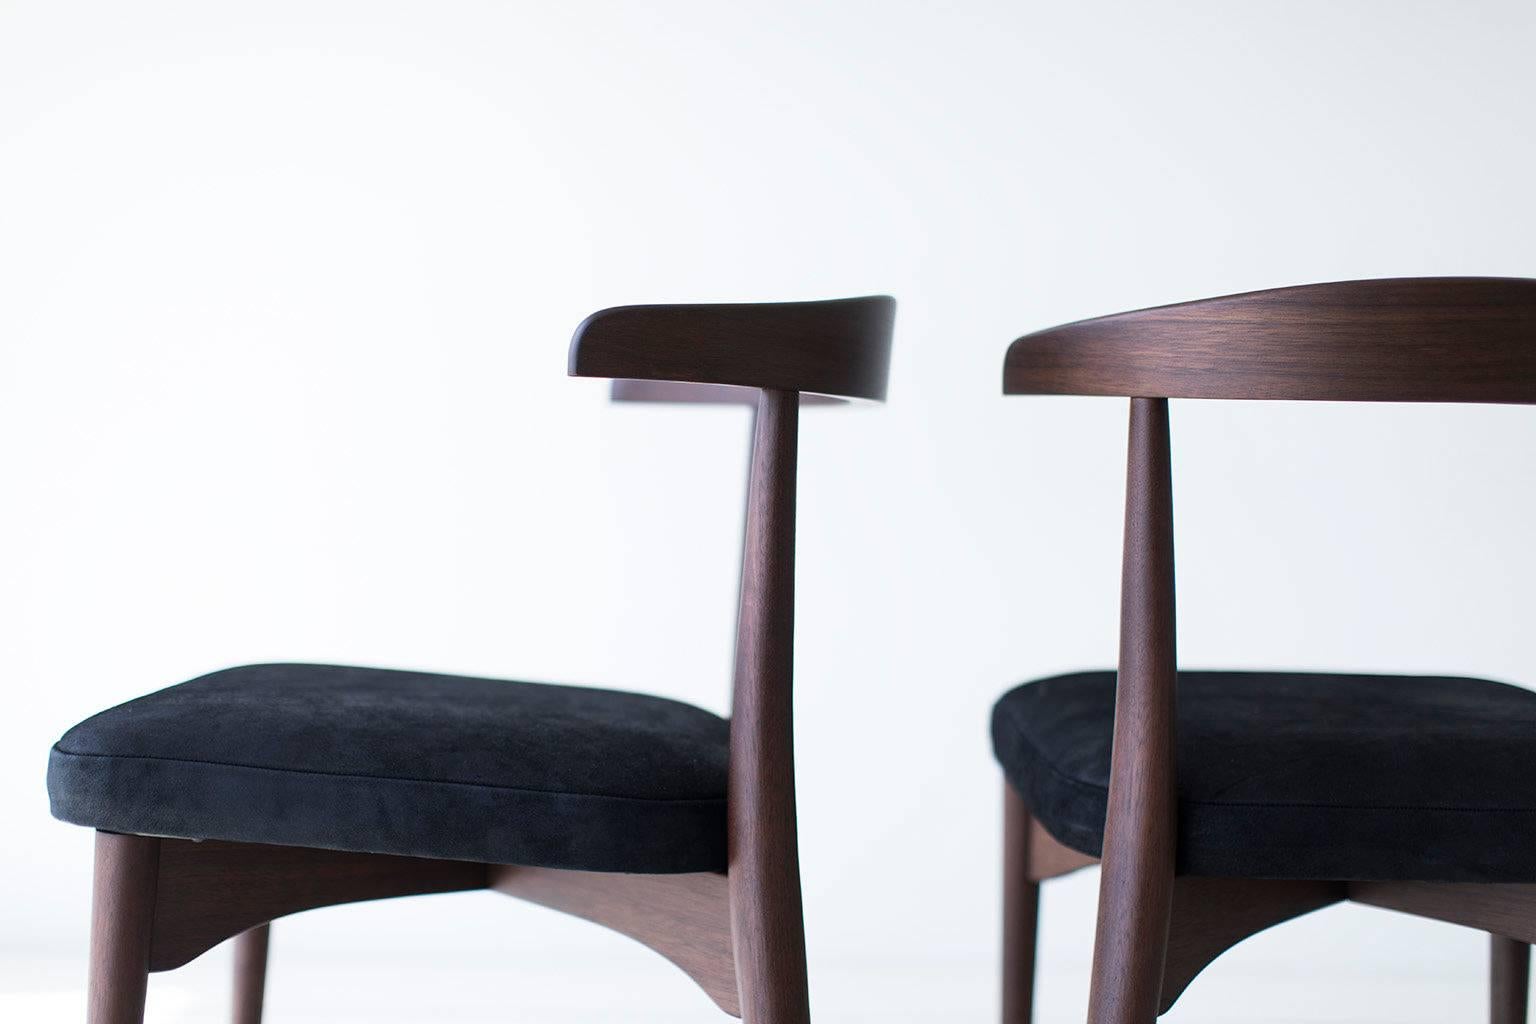 Designer: Lawrence Peabody

Manufacturer: Craft Associates furniture
Period/Model: Mid-Century Modern
Specs: Walnut, leather


These Lawrence Peabody dining side chairs P-1709 are expertly handcrafted and upholstered. These Peabody chairs are